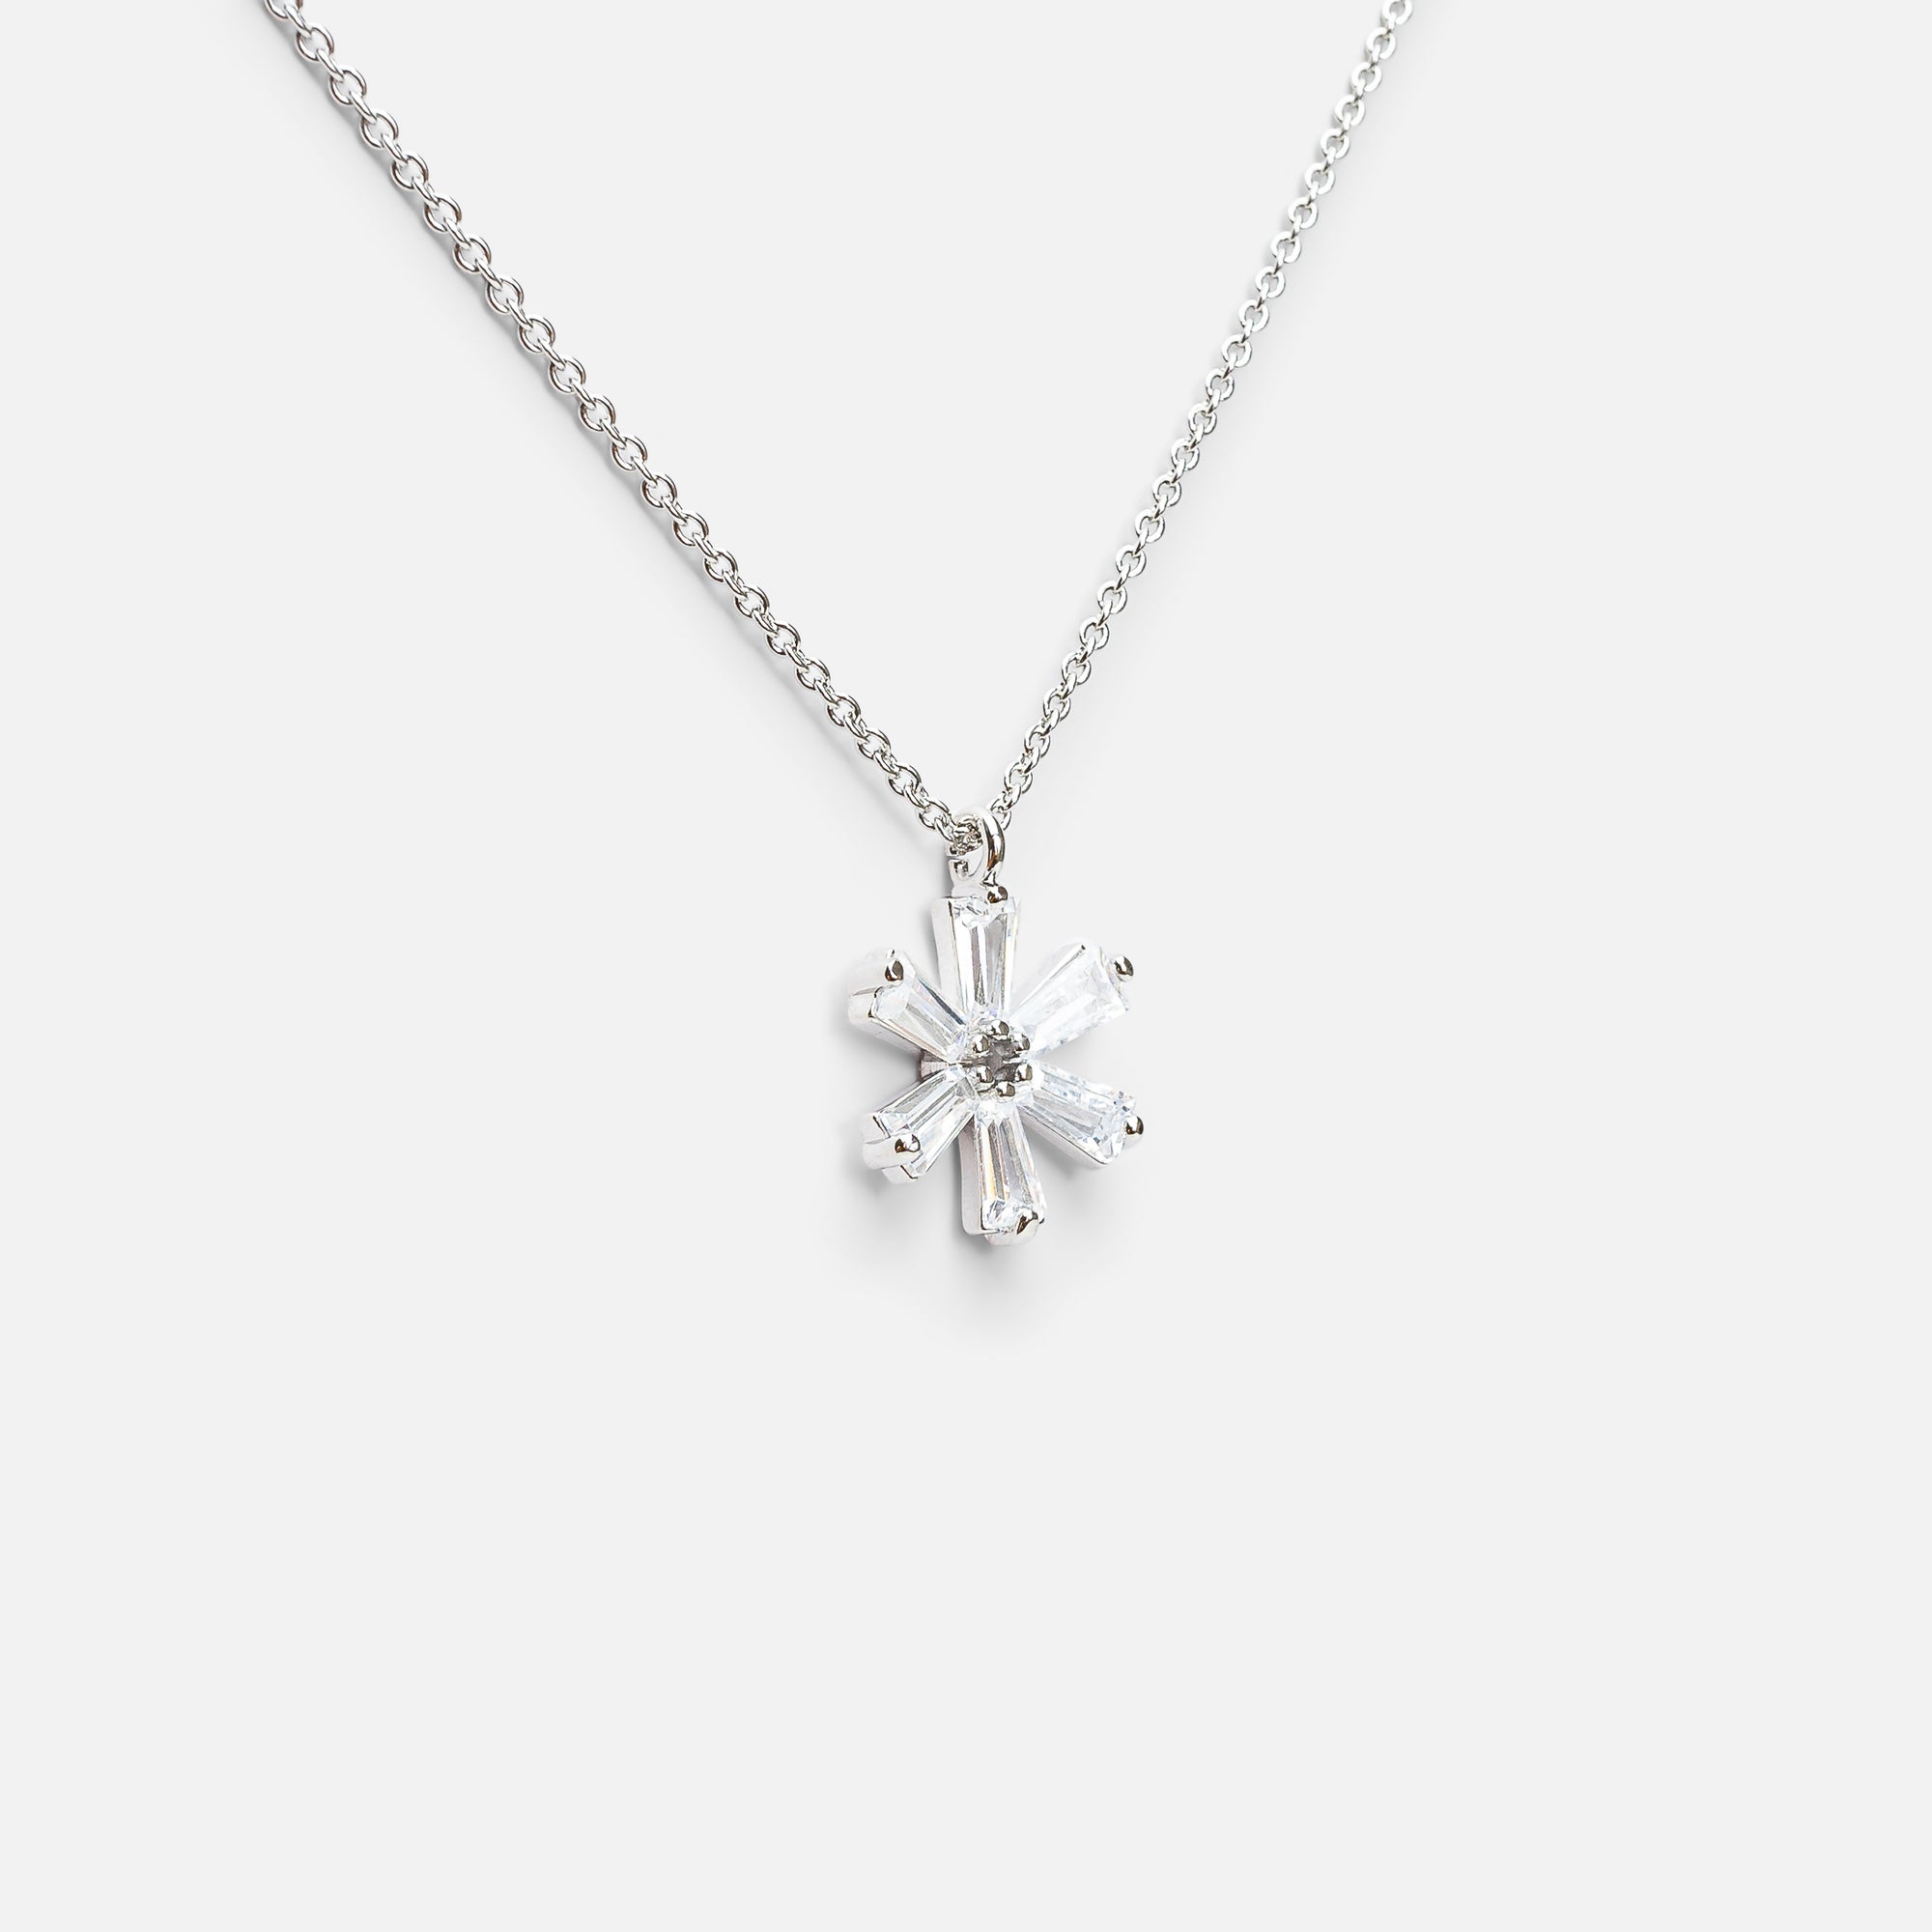 Silver pendant with small flower